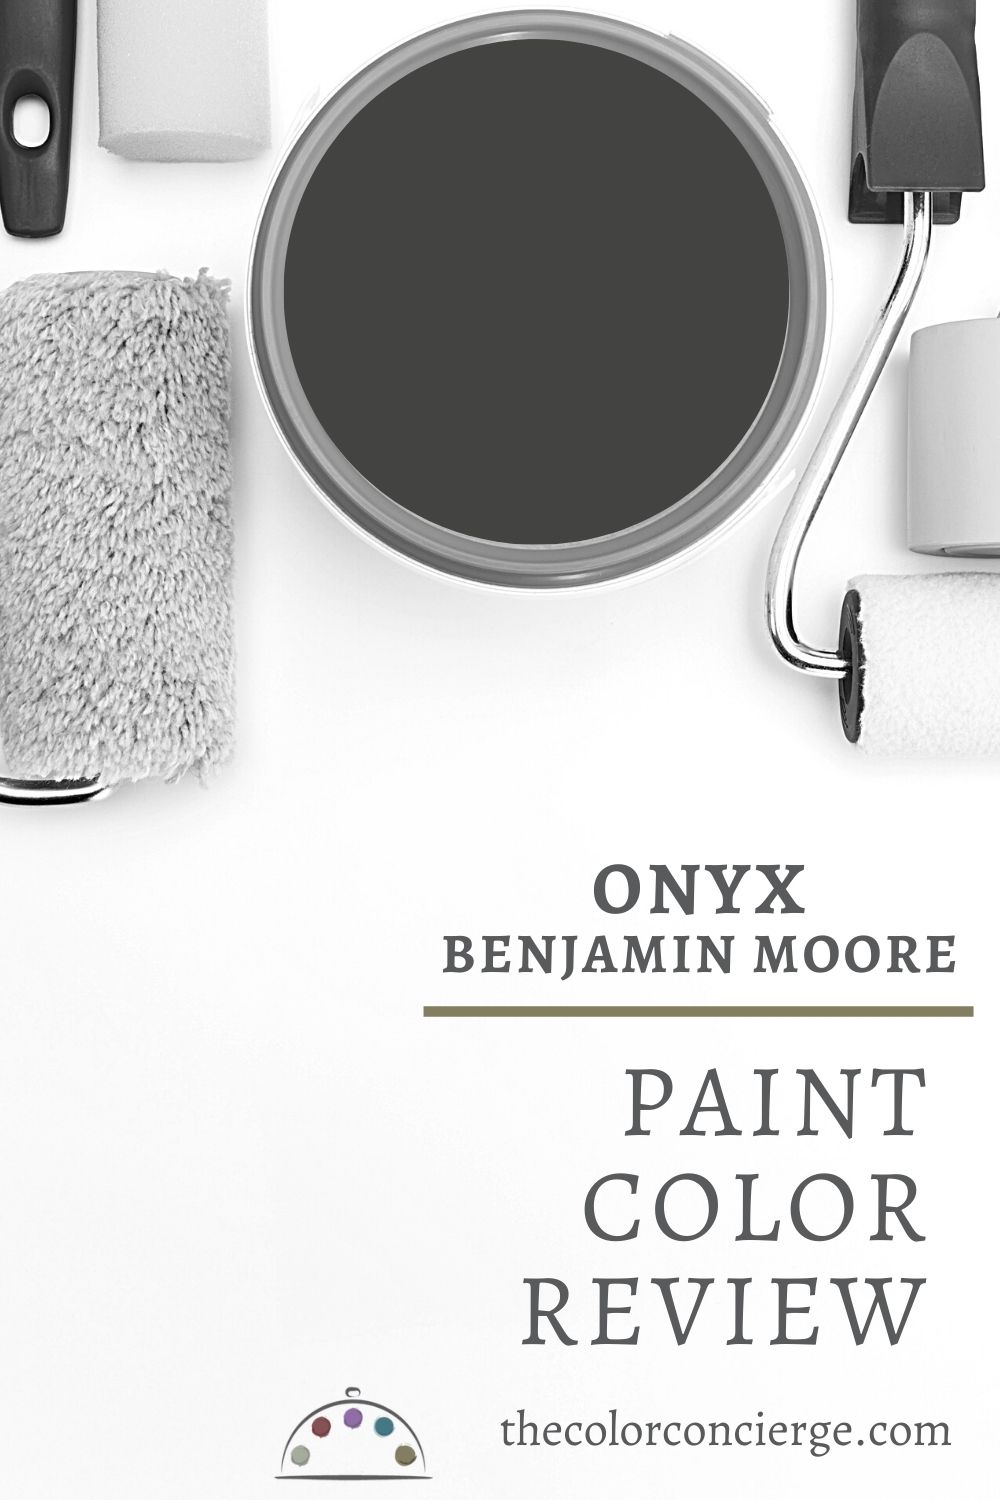 Benjamin Moore Onyx paint color review